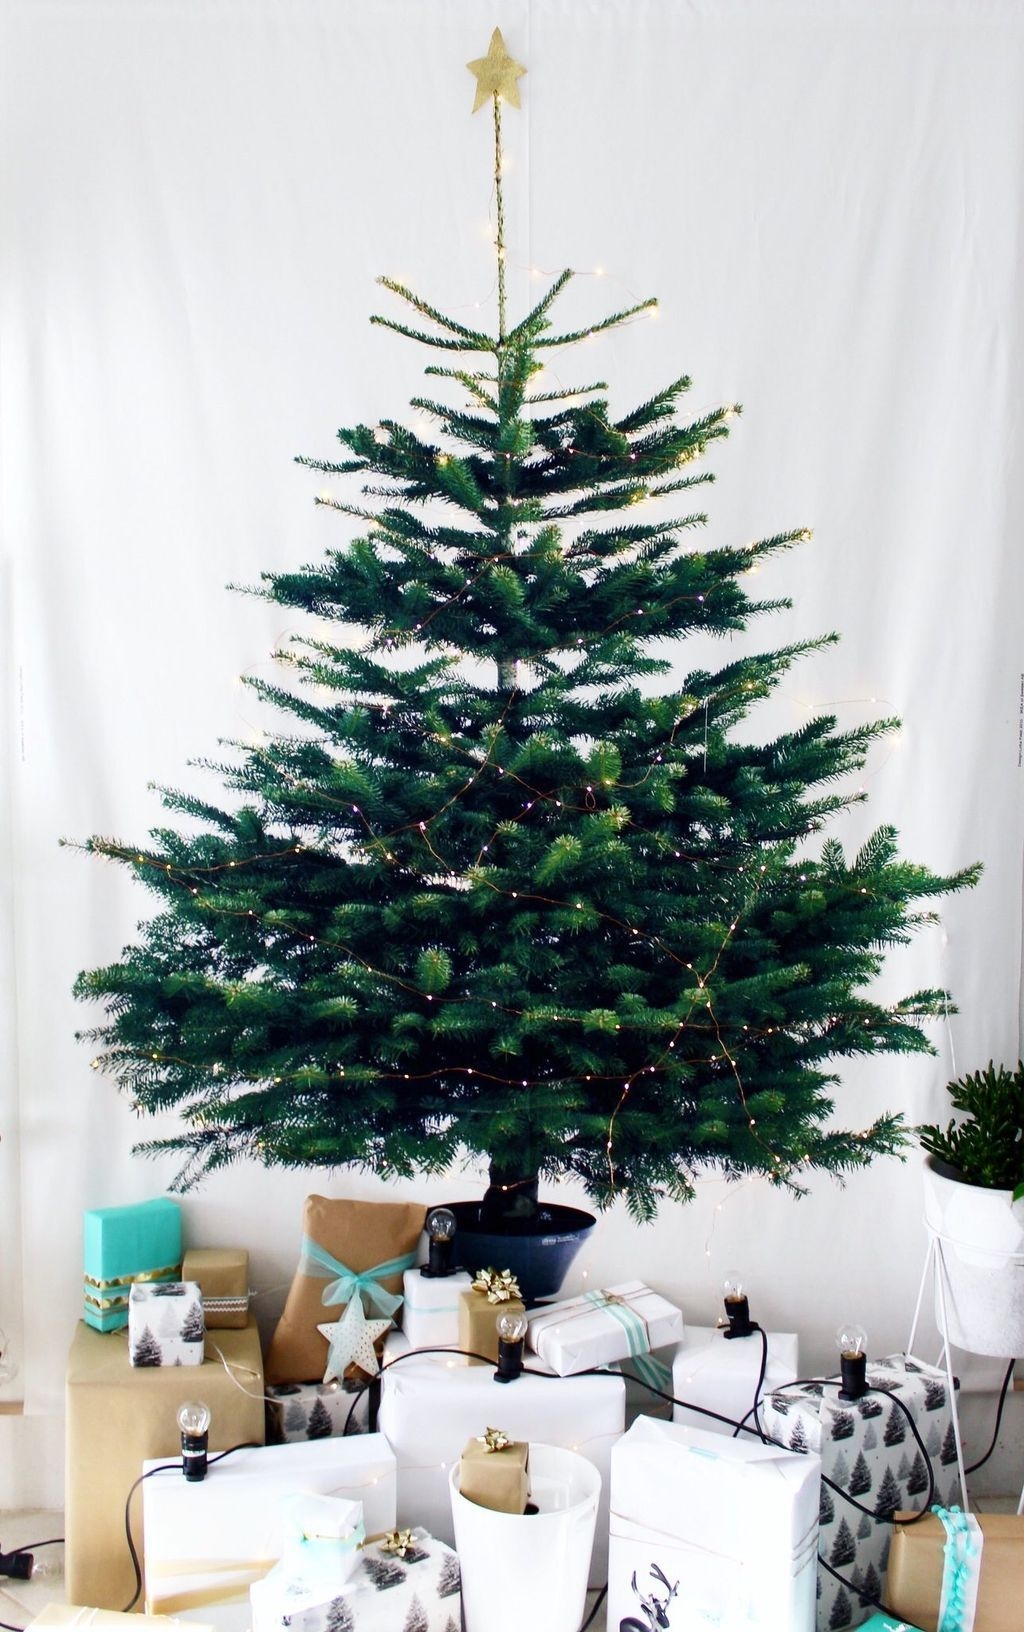 Inspiring Home Decoration Ideas With Small Christmas Tree 24